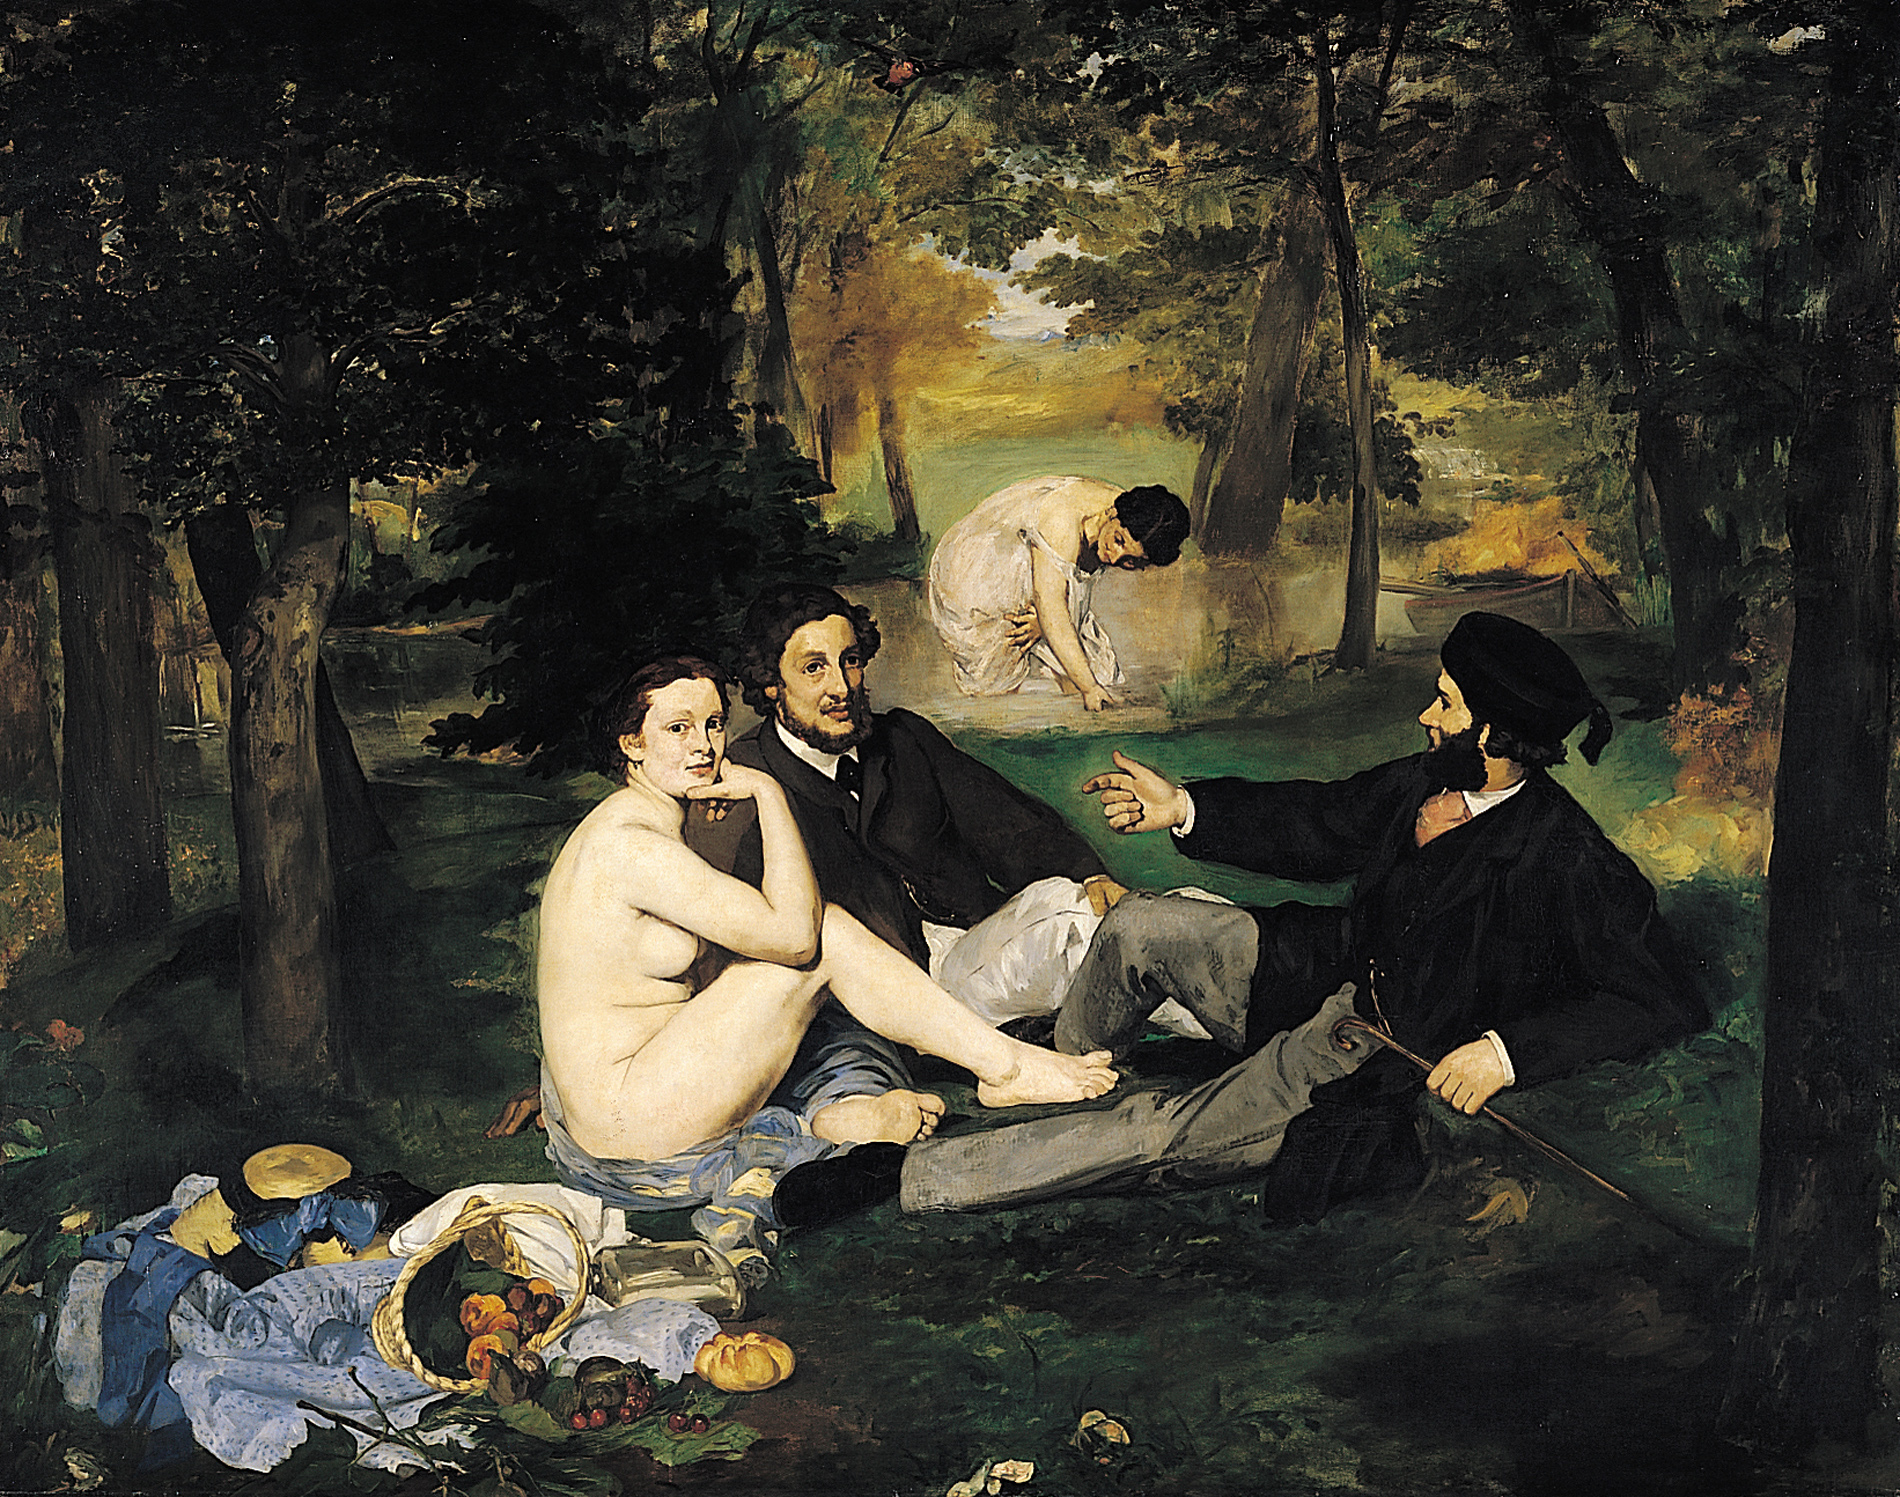 The Luncheon On The Grass, Edouard Manet, 1863